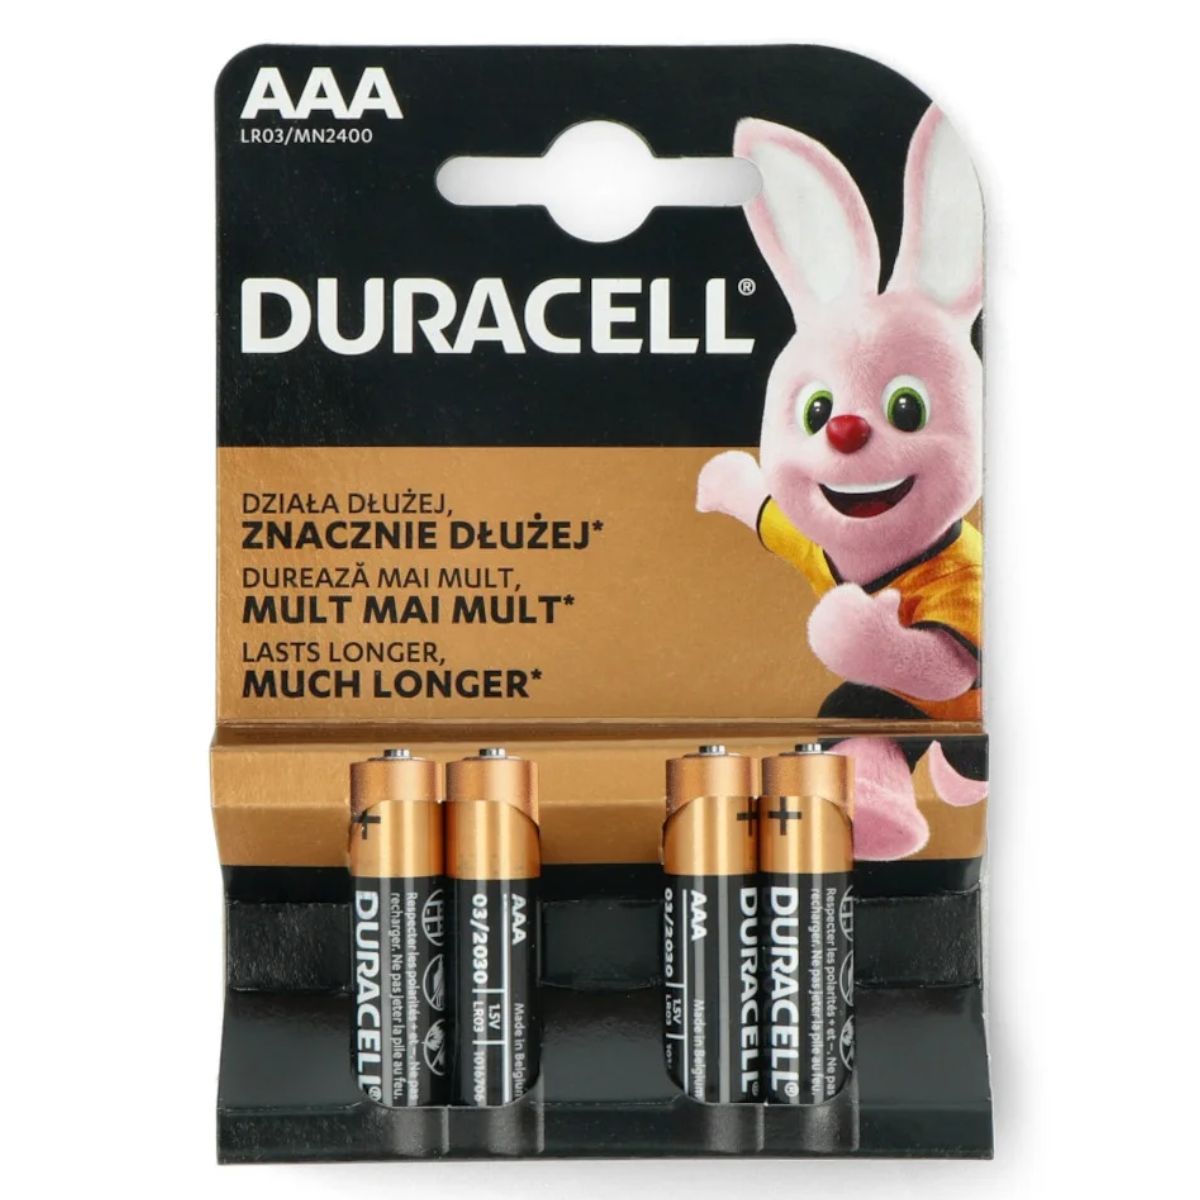 Packaging of Duracell - Duralock AAA Batteries featuring the brand's pink bunny mascot, with text in multiple languages stating "long-lasting energy.